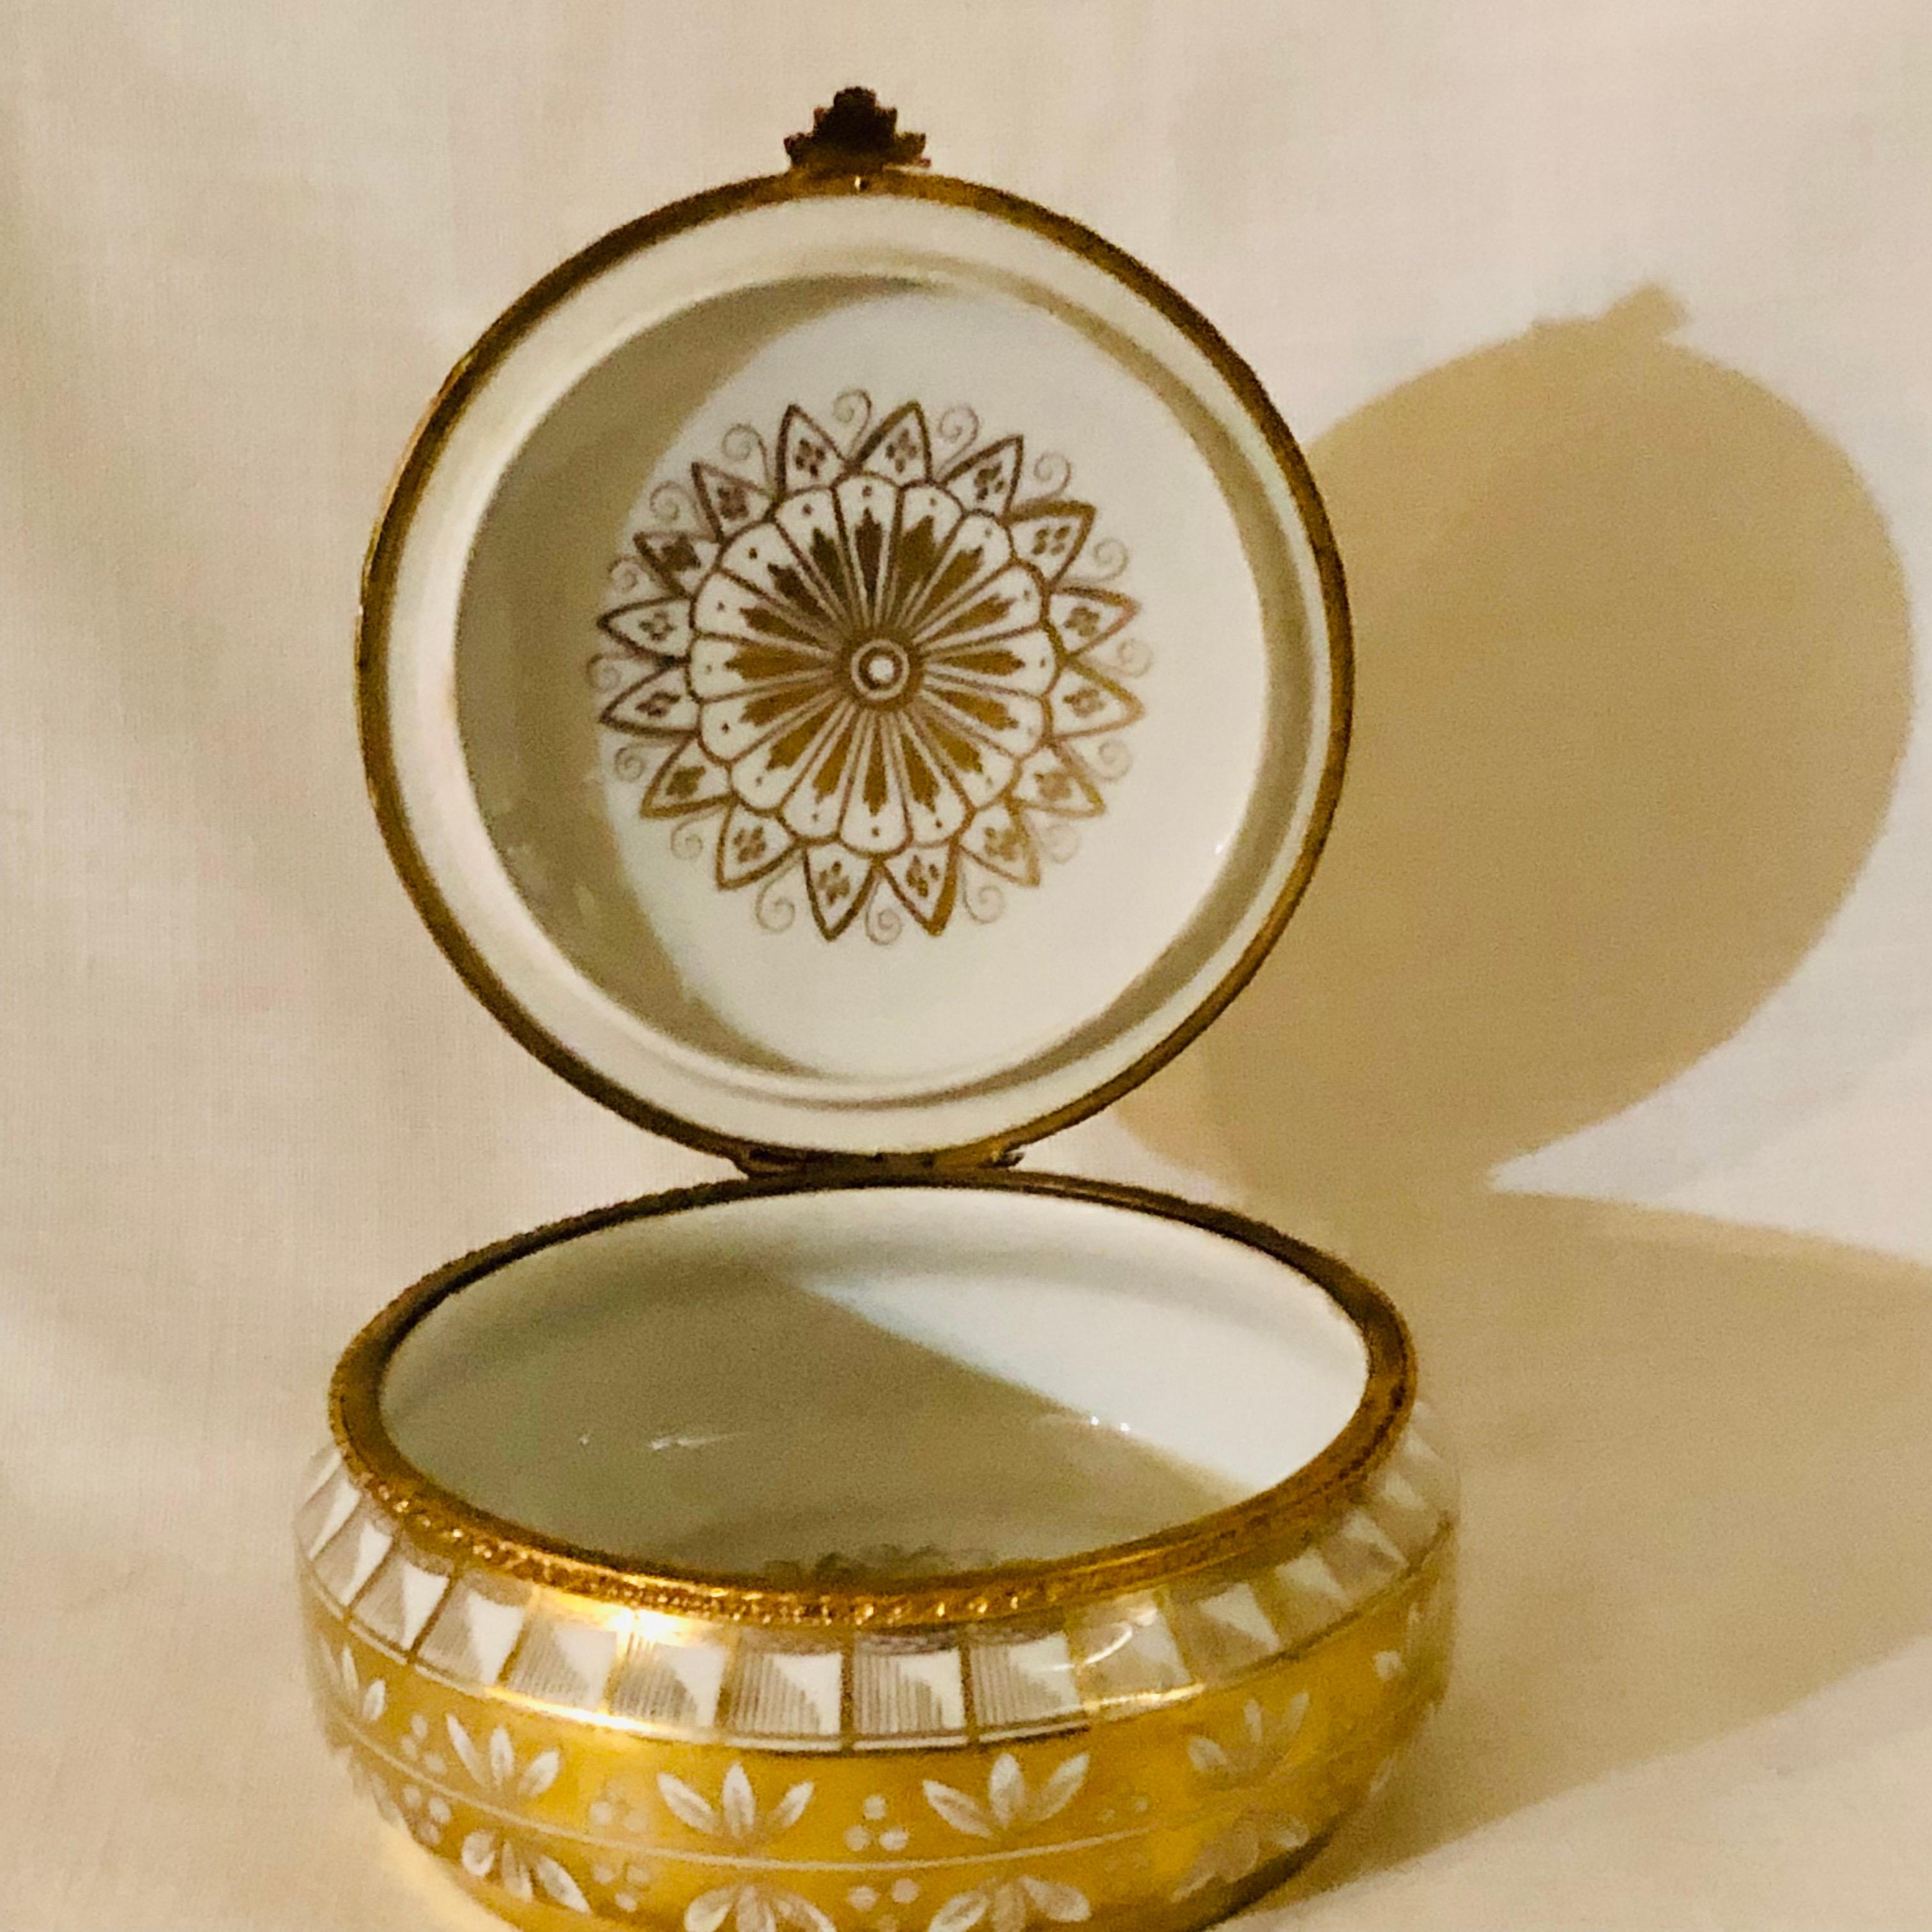 Gilt Le Tallec Porcelain Box with Gold Painted Decoration on a White Porcelain Ground